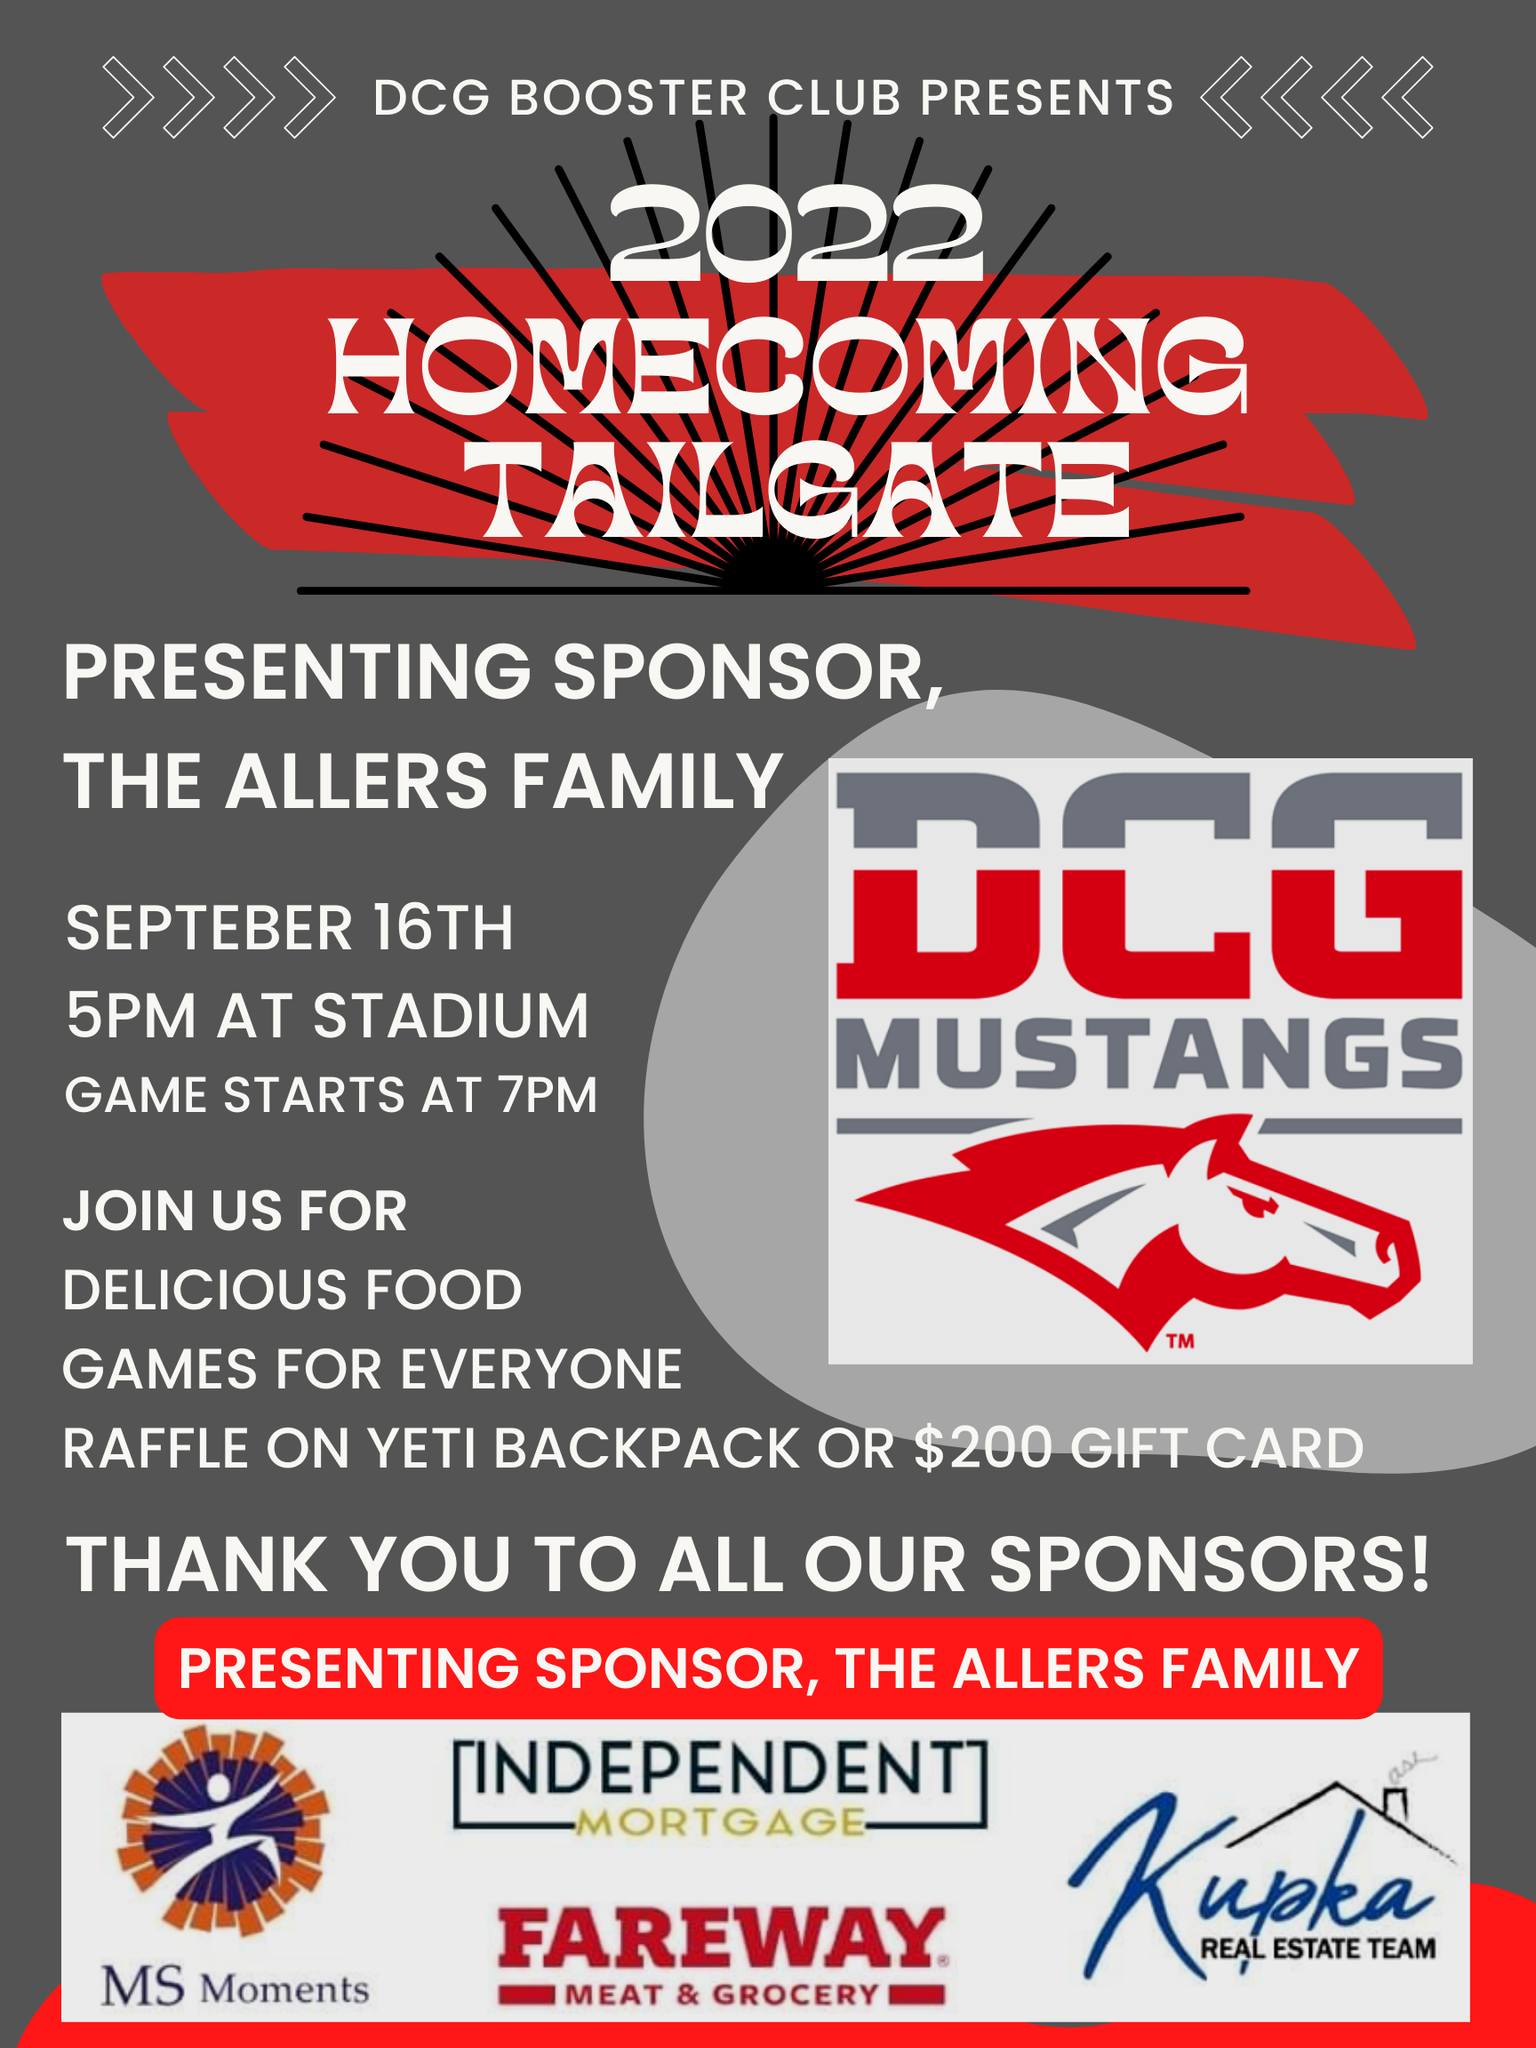 DCG Booster Homecoming Tailgate 2022